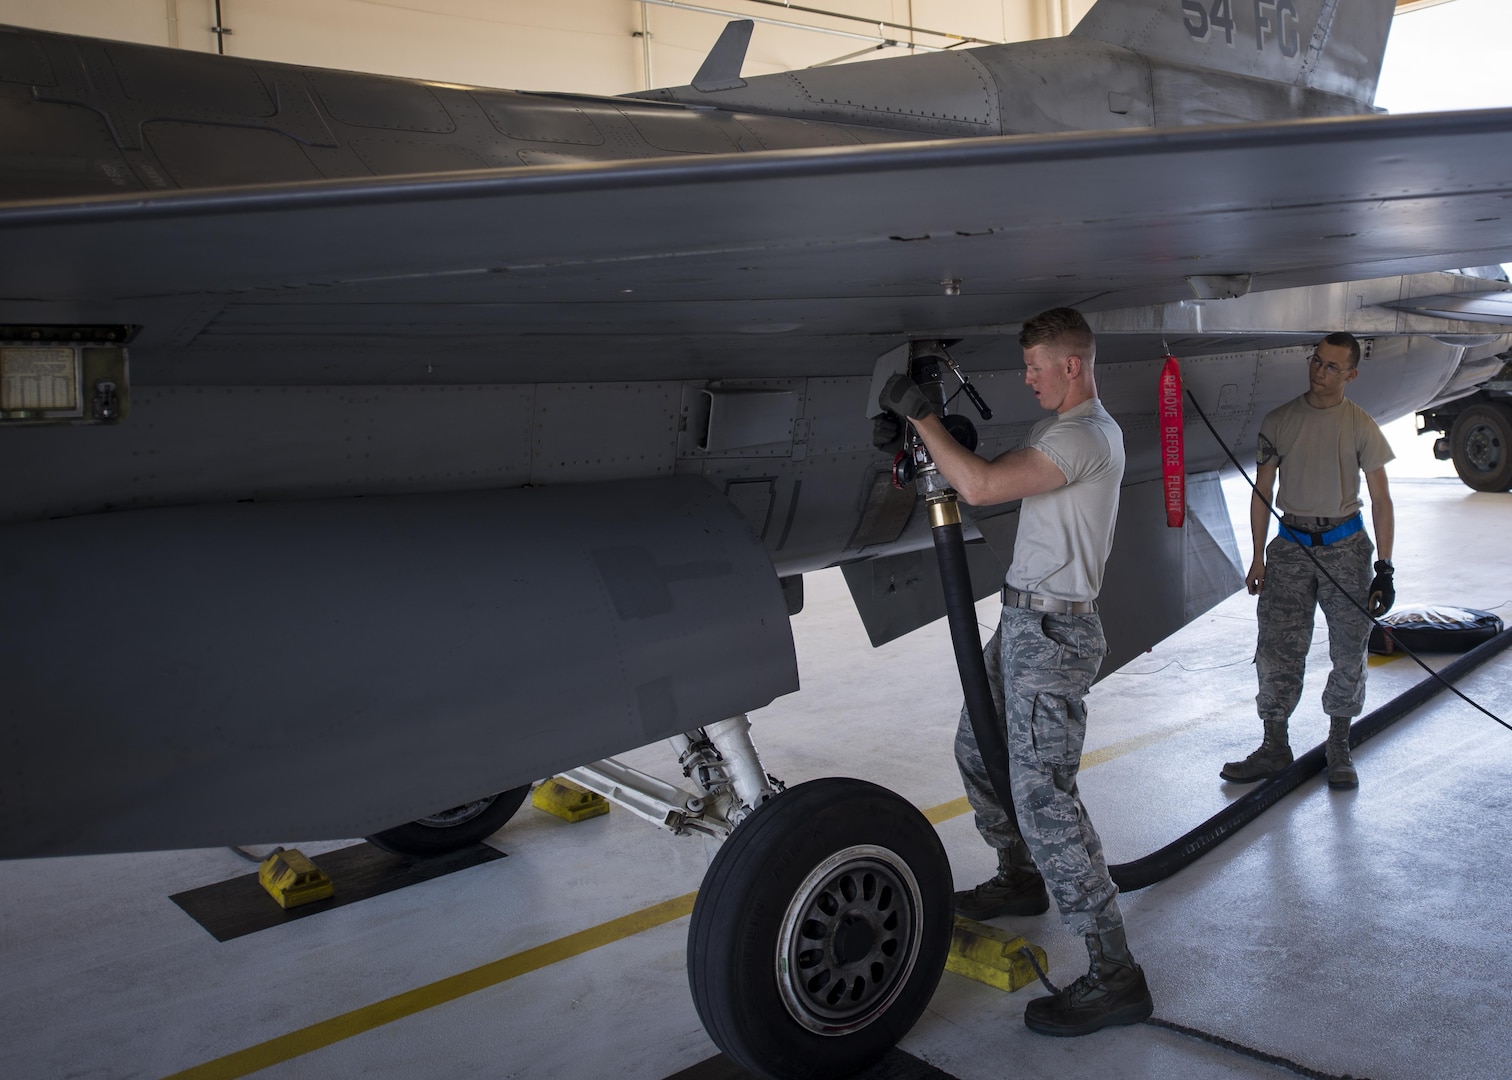 Airman 1st Class Derek King, a 54th Aircraft Maintenance Unit F-16 crew chief, refuels an F-16 Fighting Falcon following a recovery operation at Holloman Air Force Base, N.M. on May 4, 2017. The 54th AMU runs 24 hour operations. Therefore, Holloman’s maintenance Airmen work round-the-clock to keep these aircraft operable, performing a variety of mechanical and technical duties. (U.S. Air Force photo by Airman 1st Class Alexis P. Docherty)